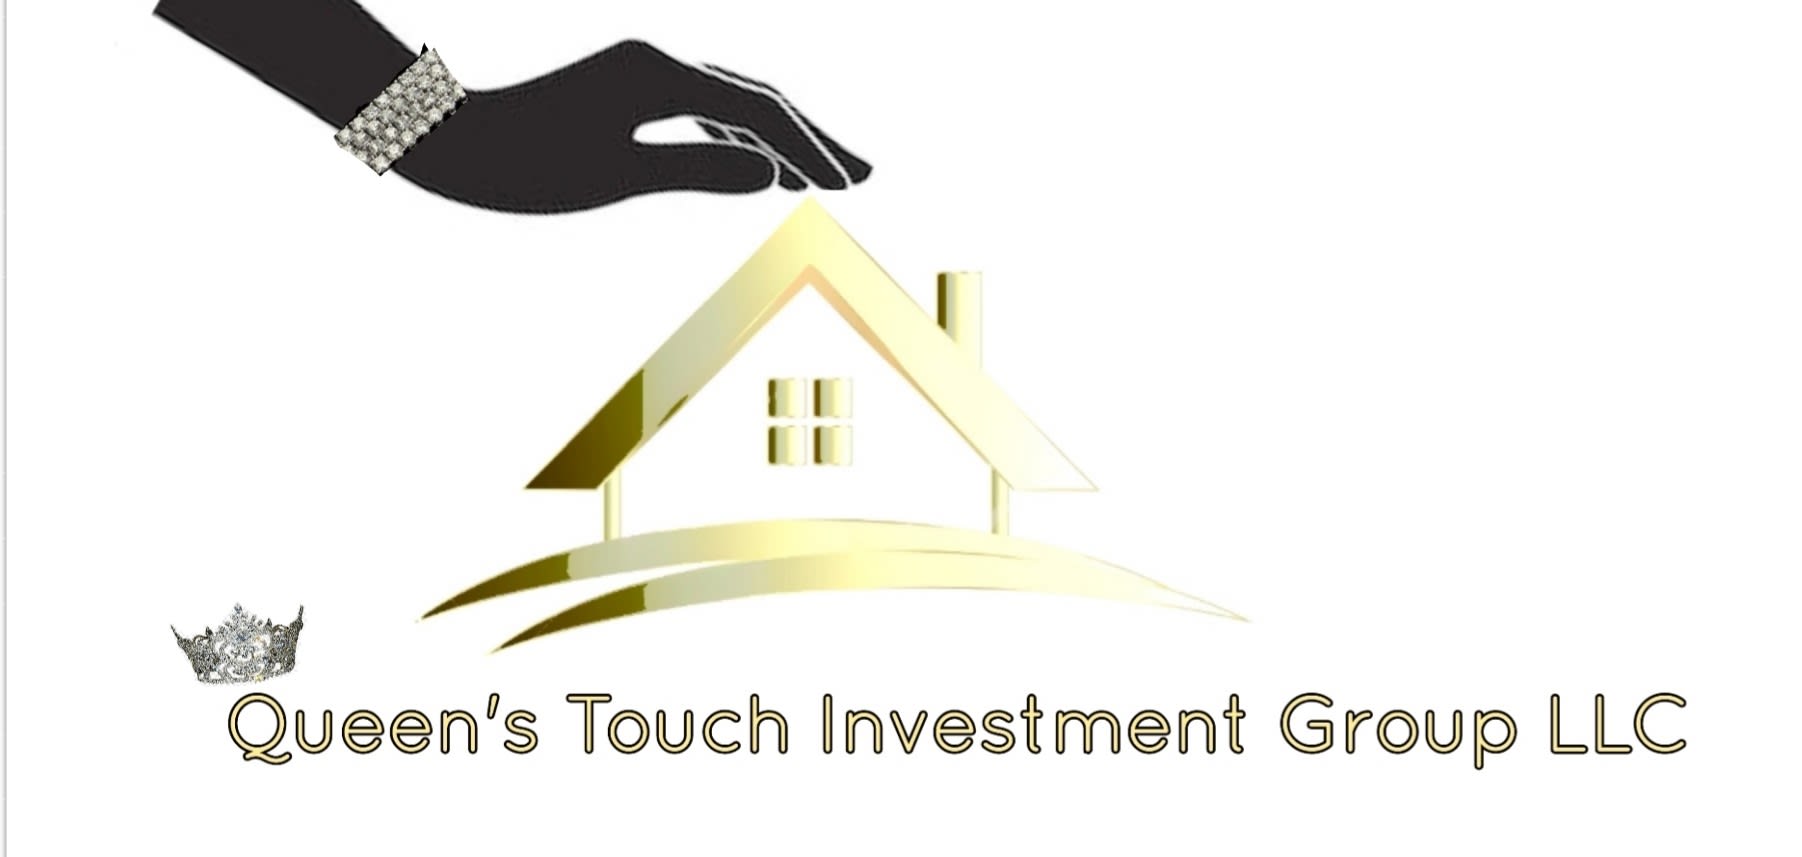 Queen's Touch Investment Group LLC